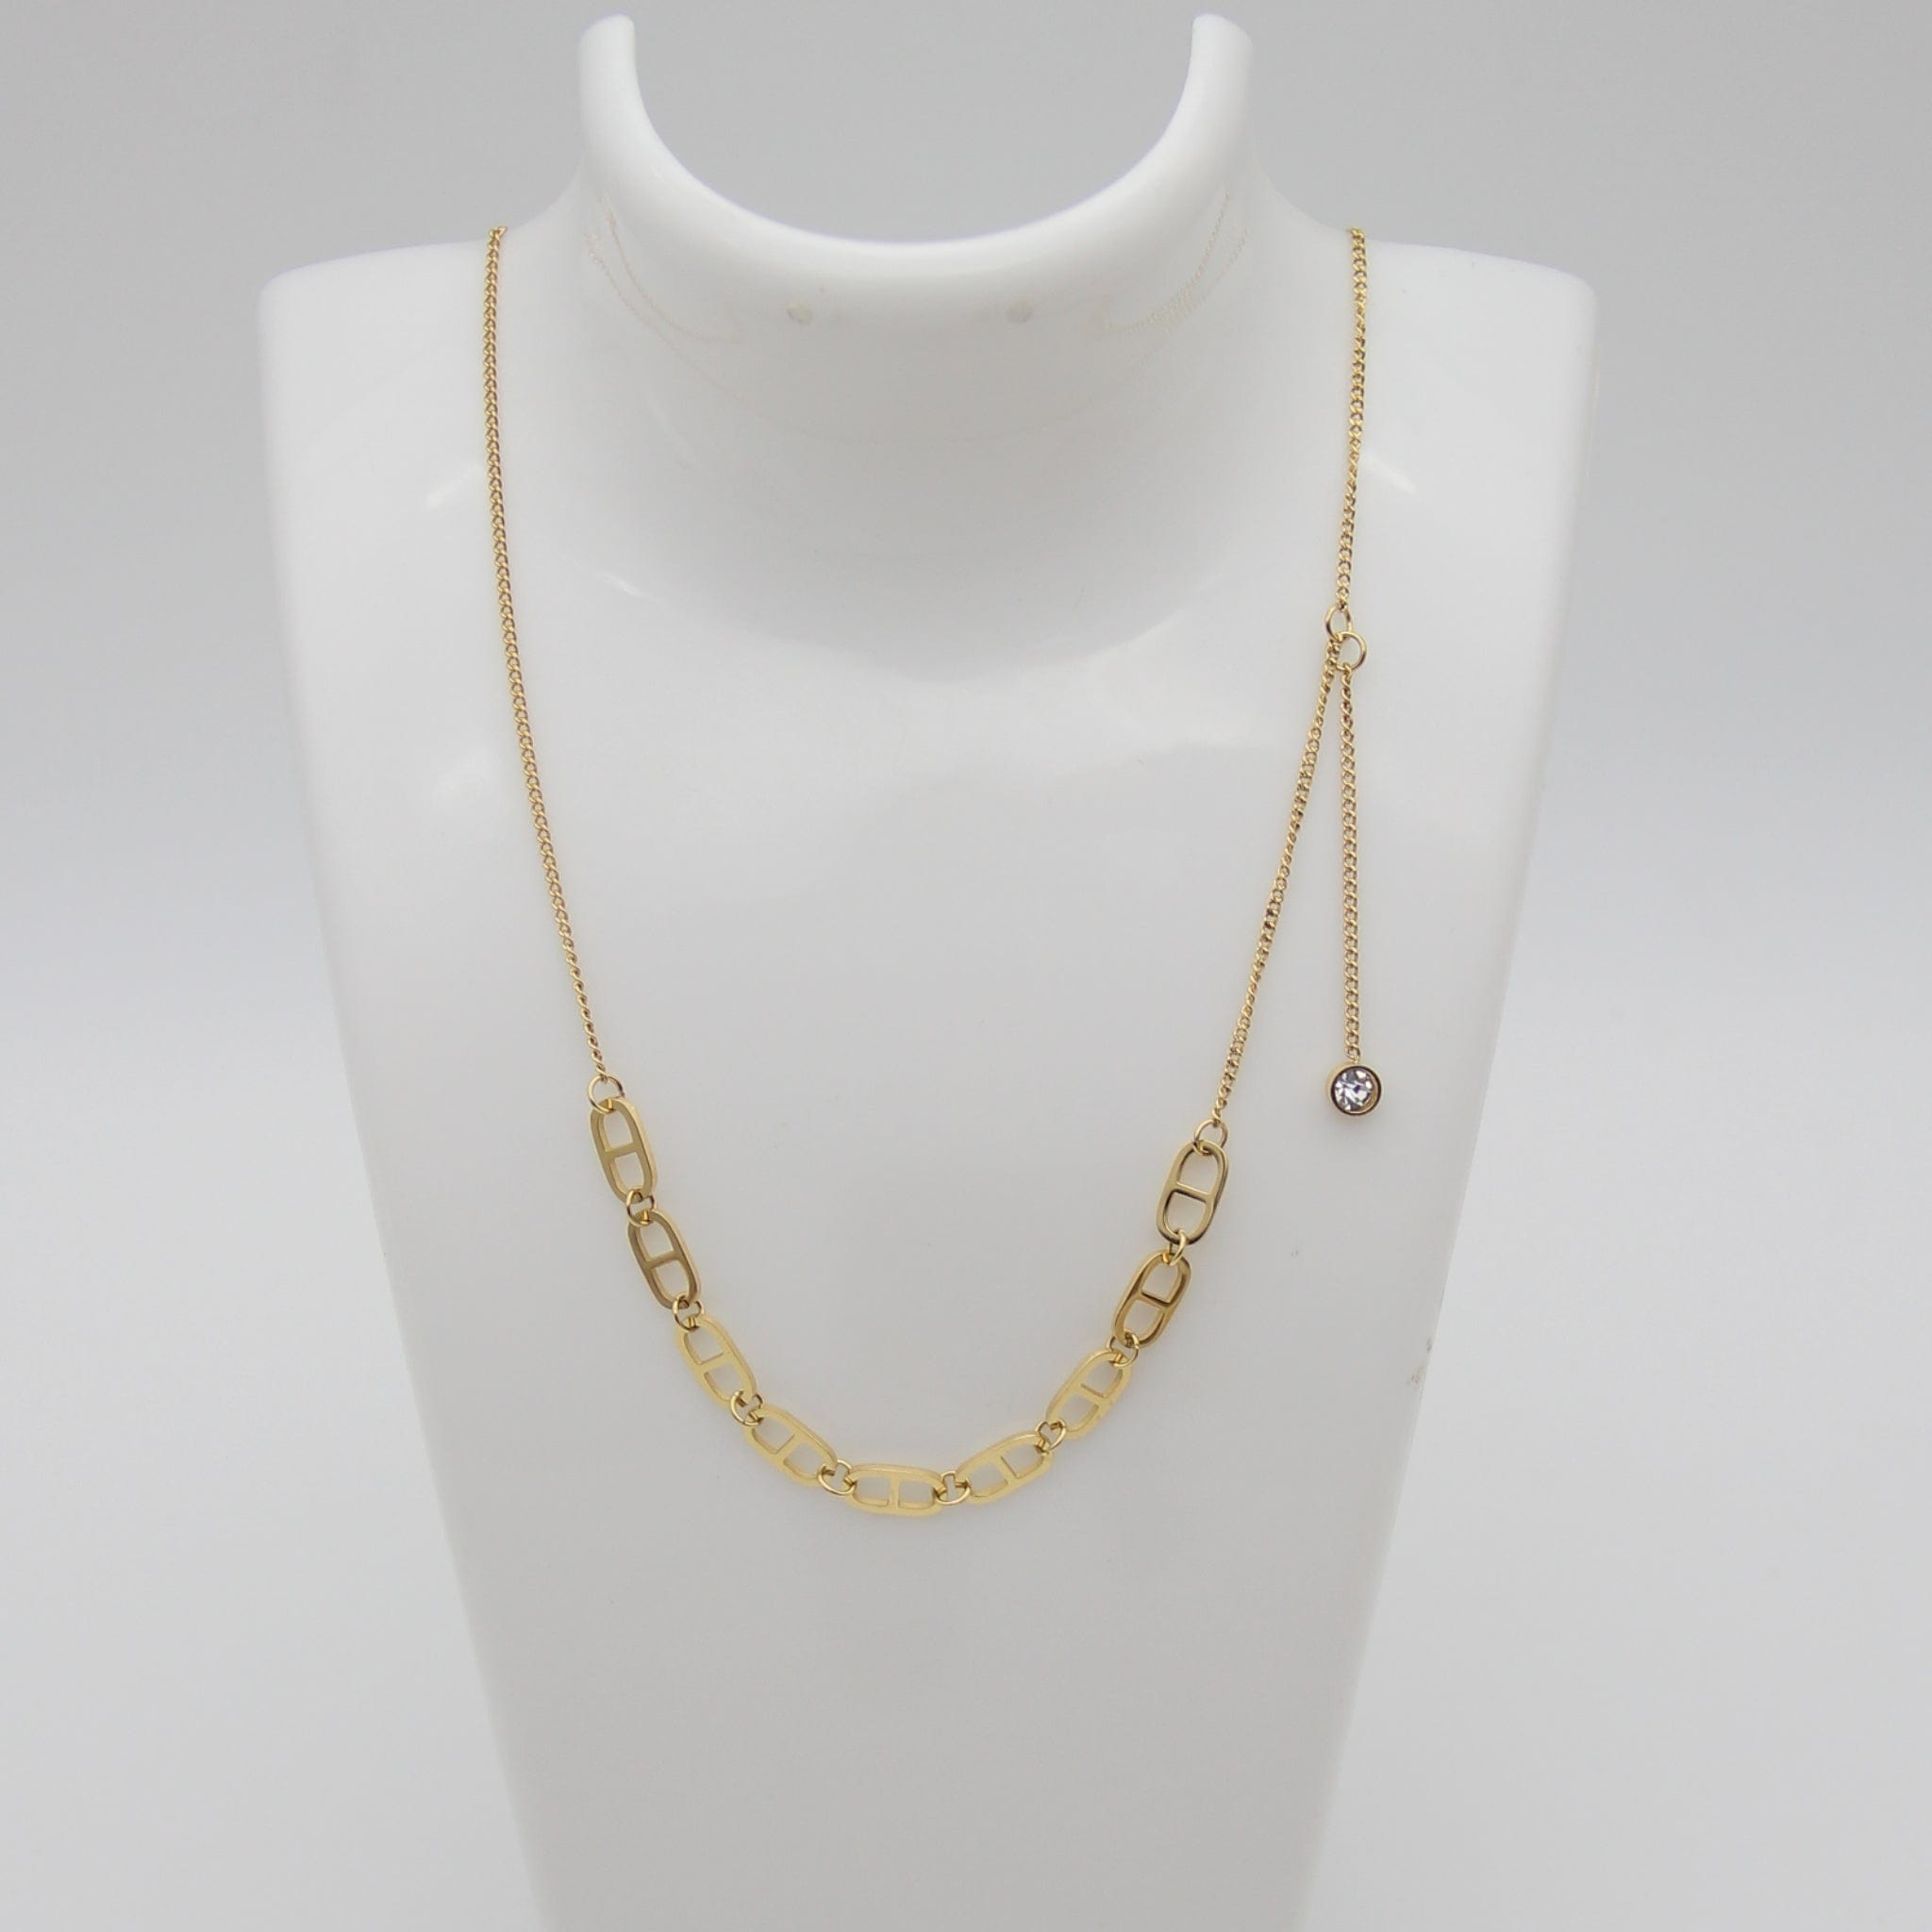 Outlet W&B Female Necklaces CD Basic Golden Stainless Steel Necklace